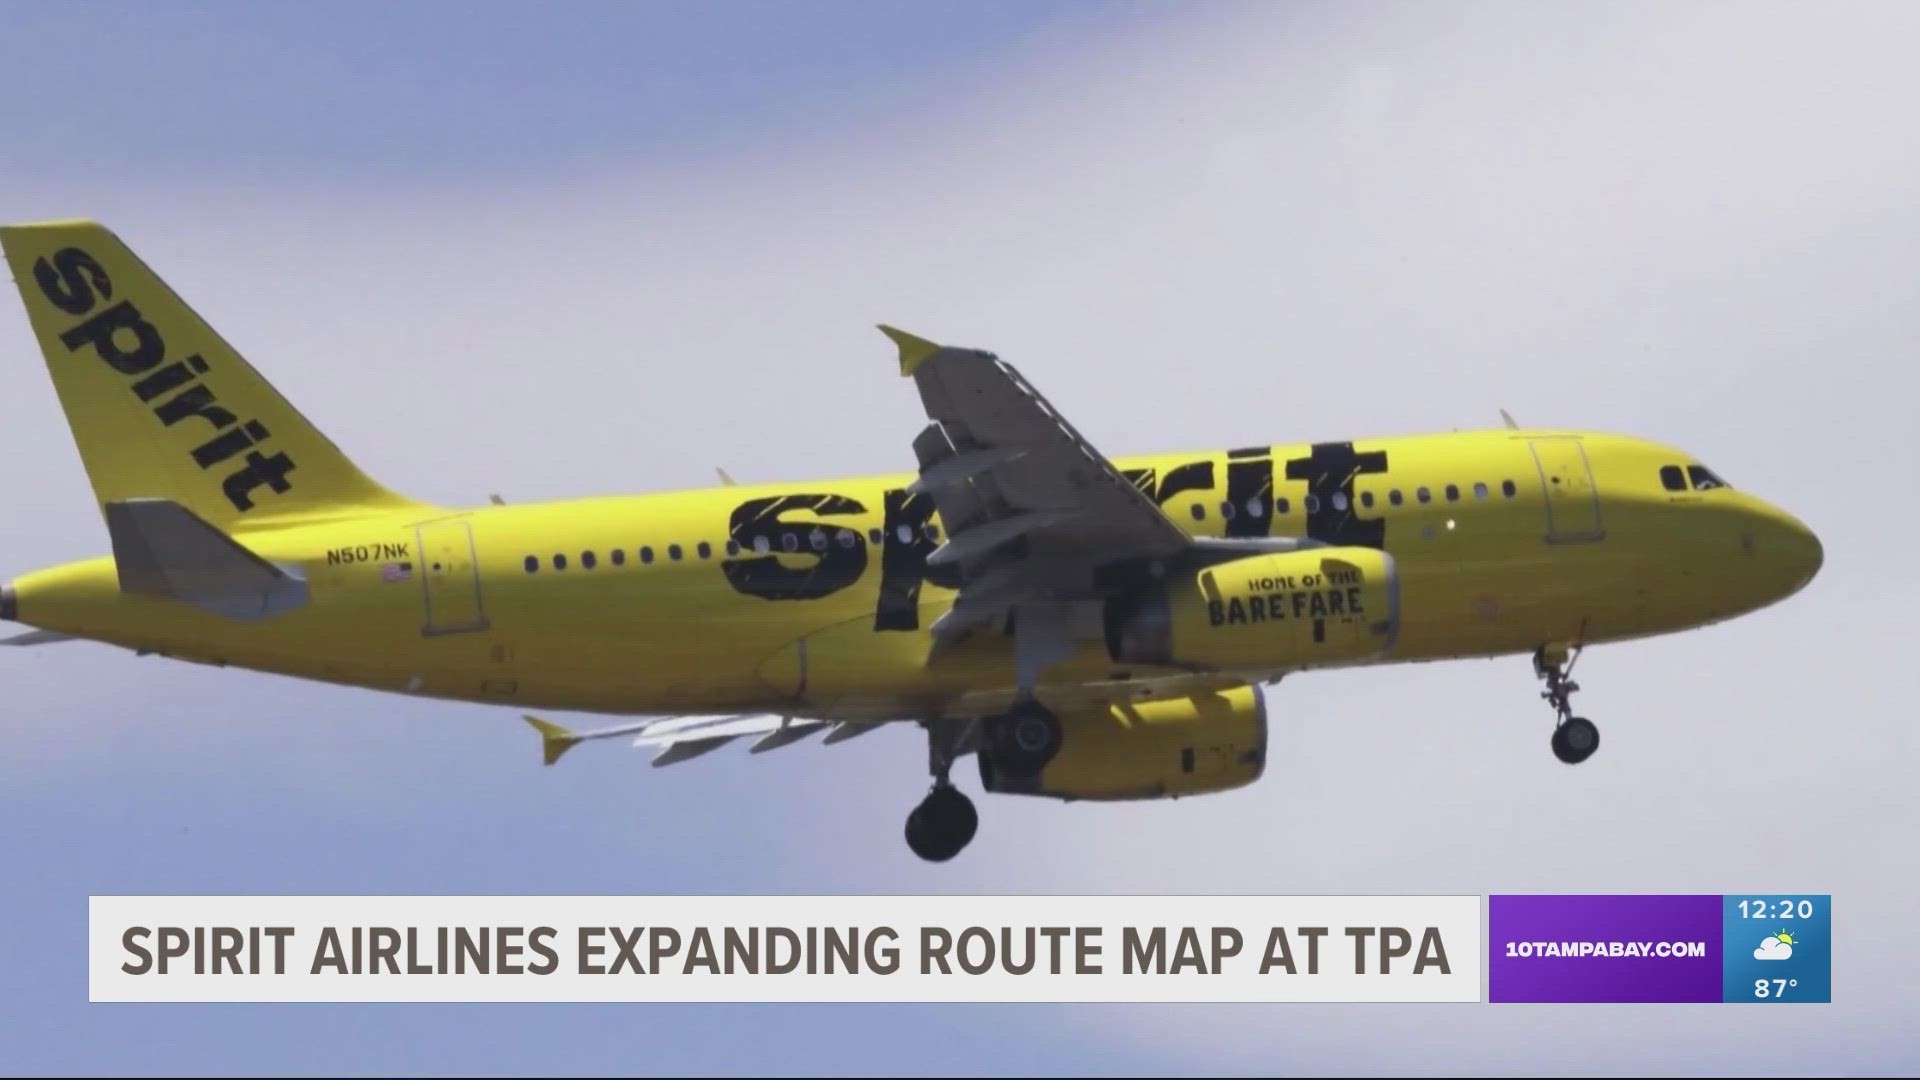 With the additional routes, Spirit Airlines will offer service to 21 cities from TPA starting Nov. 15.